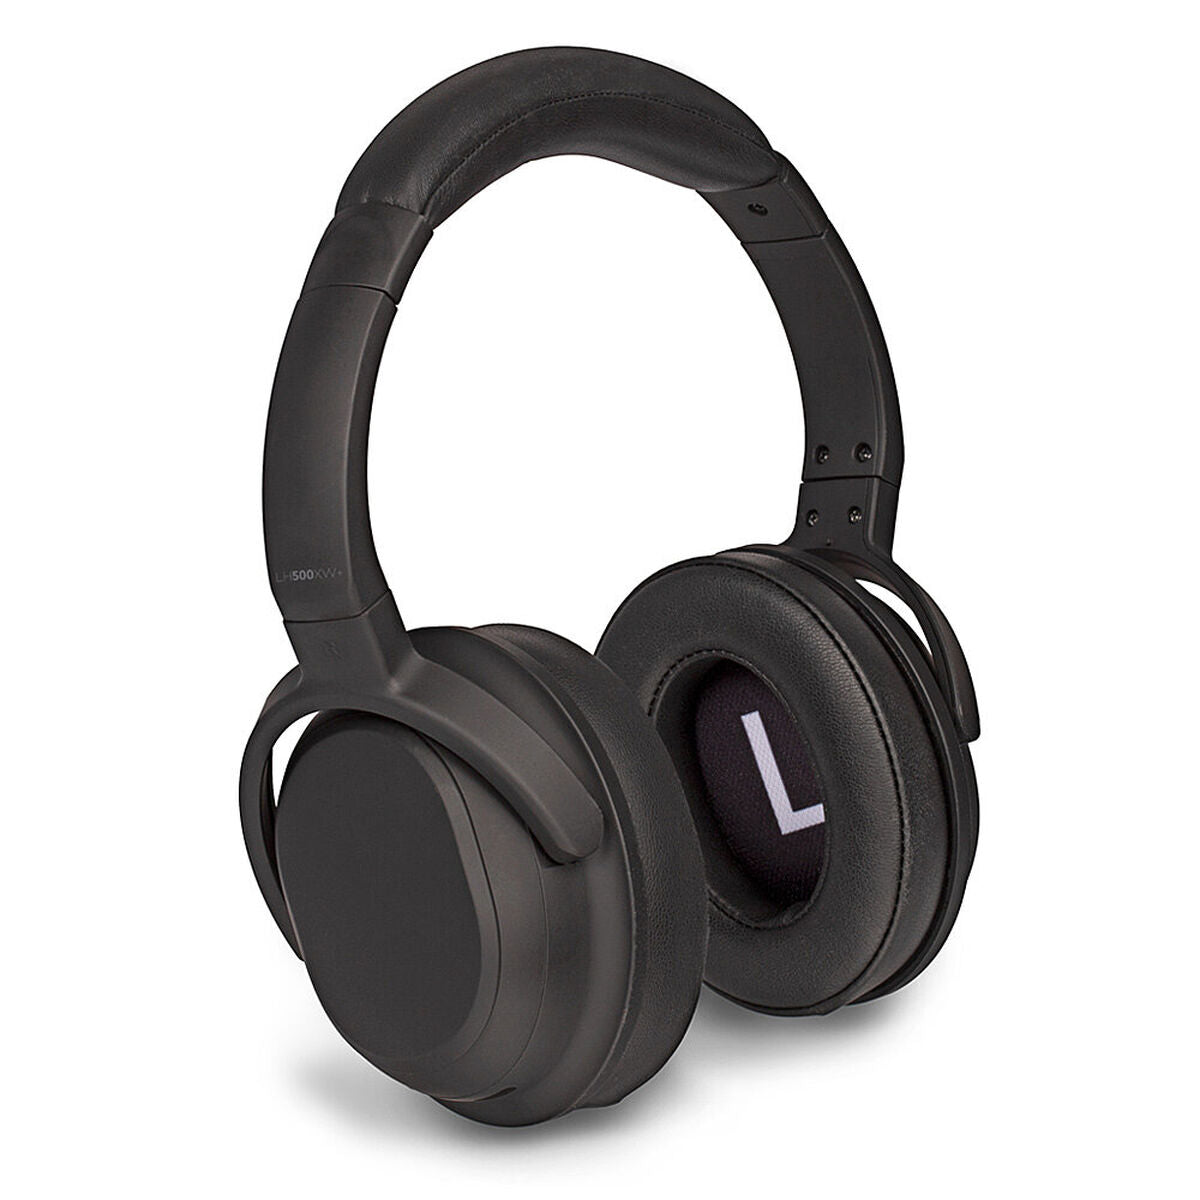 Headphones LINDY Black, LINDY, Electronics, Mobile communication and accessories, headphones-lindy-black, Brand_LINDY, category-reference-2609, category-reference-2642, category-reference-2847, category-reference-t-19653, category-reference-t-21312, category-reference-t-4036, category-reference-t-4037, computers / peripherals, Condition_NEW, entertainment, gadget, music, office, Price_100 - 200, telephones & tablets, Teleworking, RiotNook